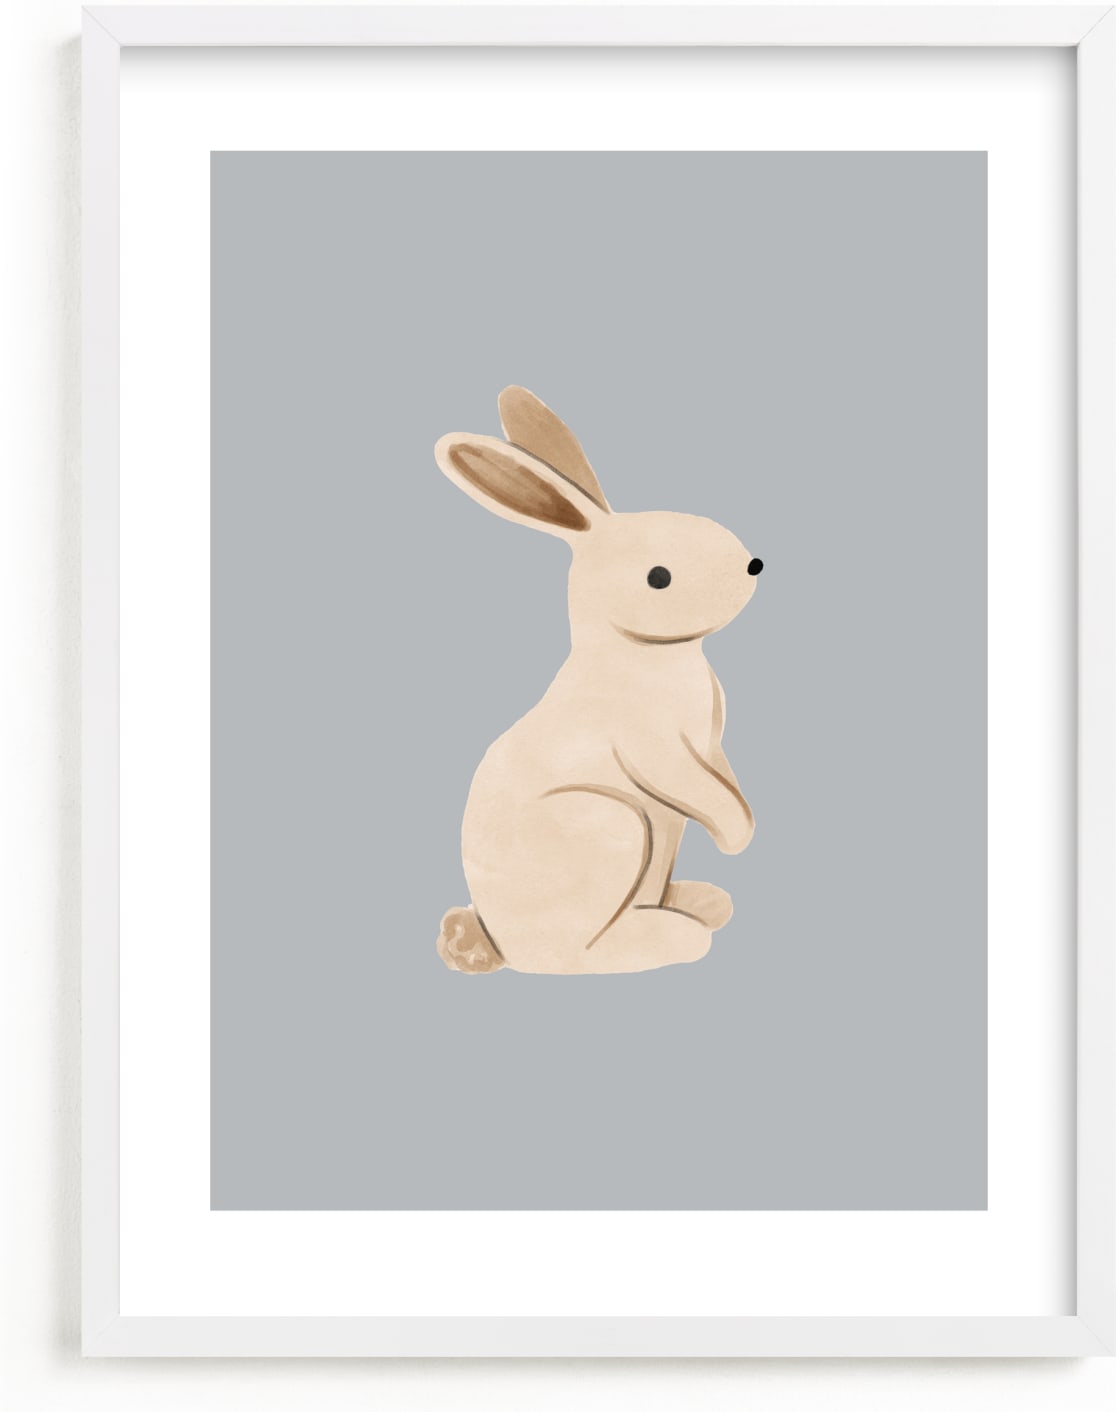 This is a blue kids wall art by Vivian Yiwing called Baby Rabbit.